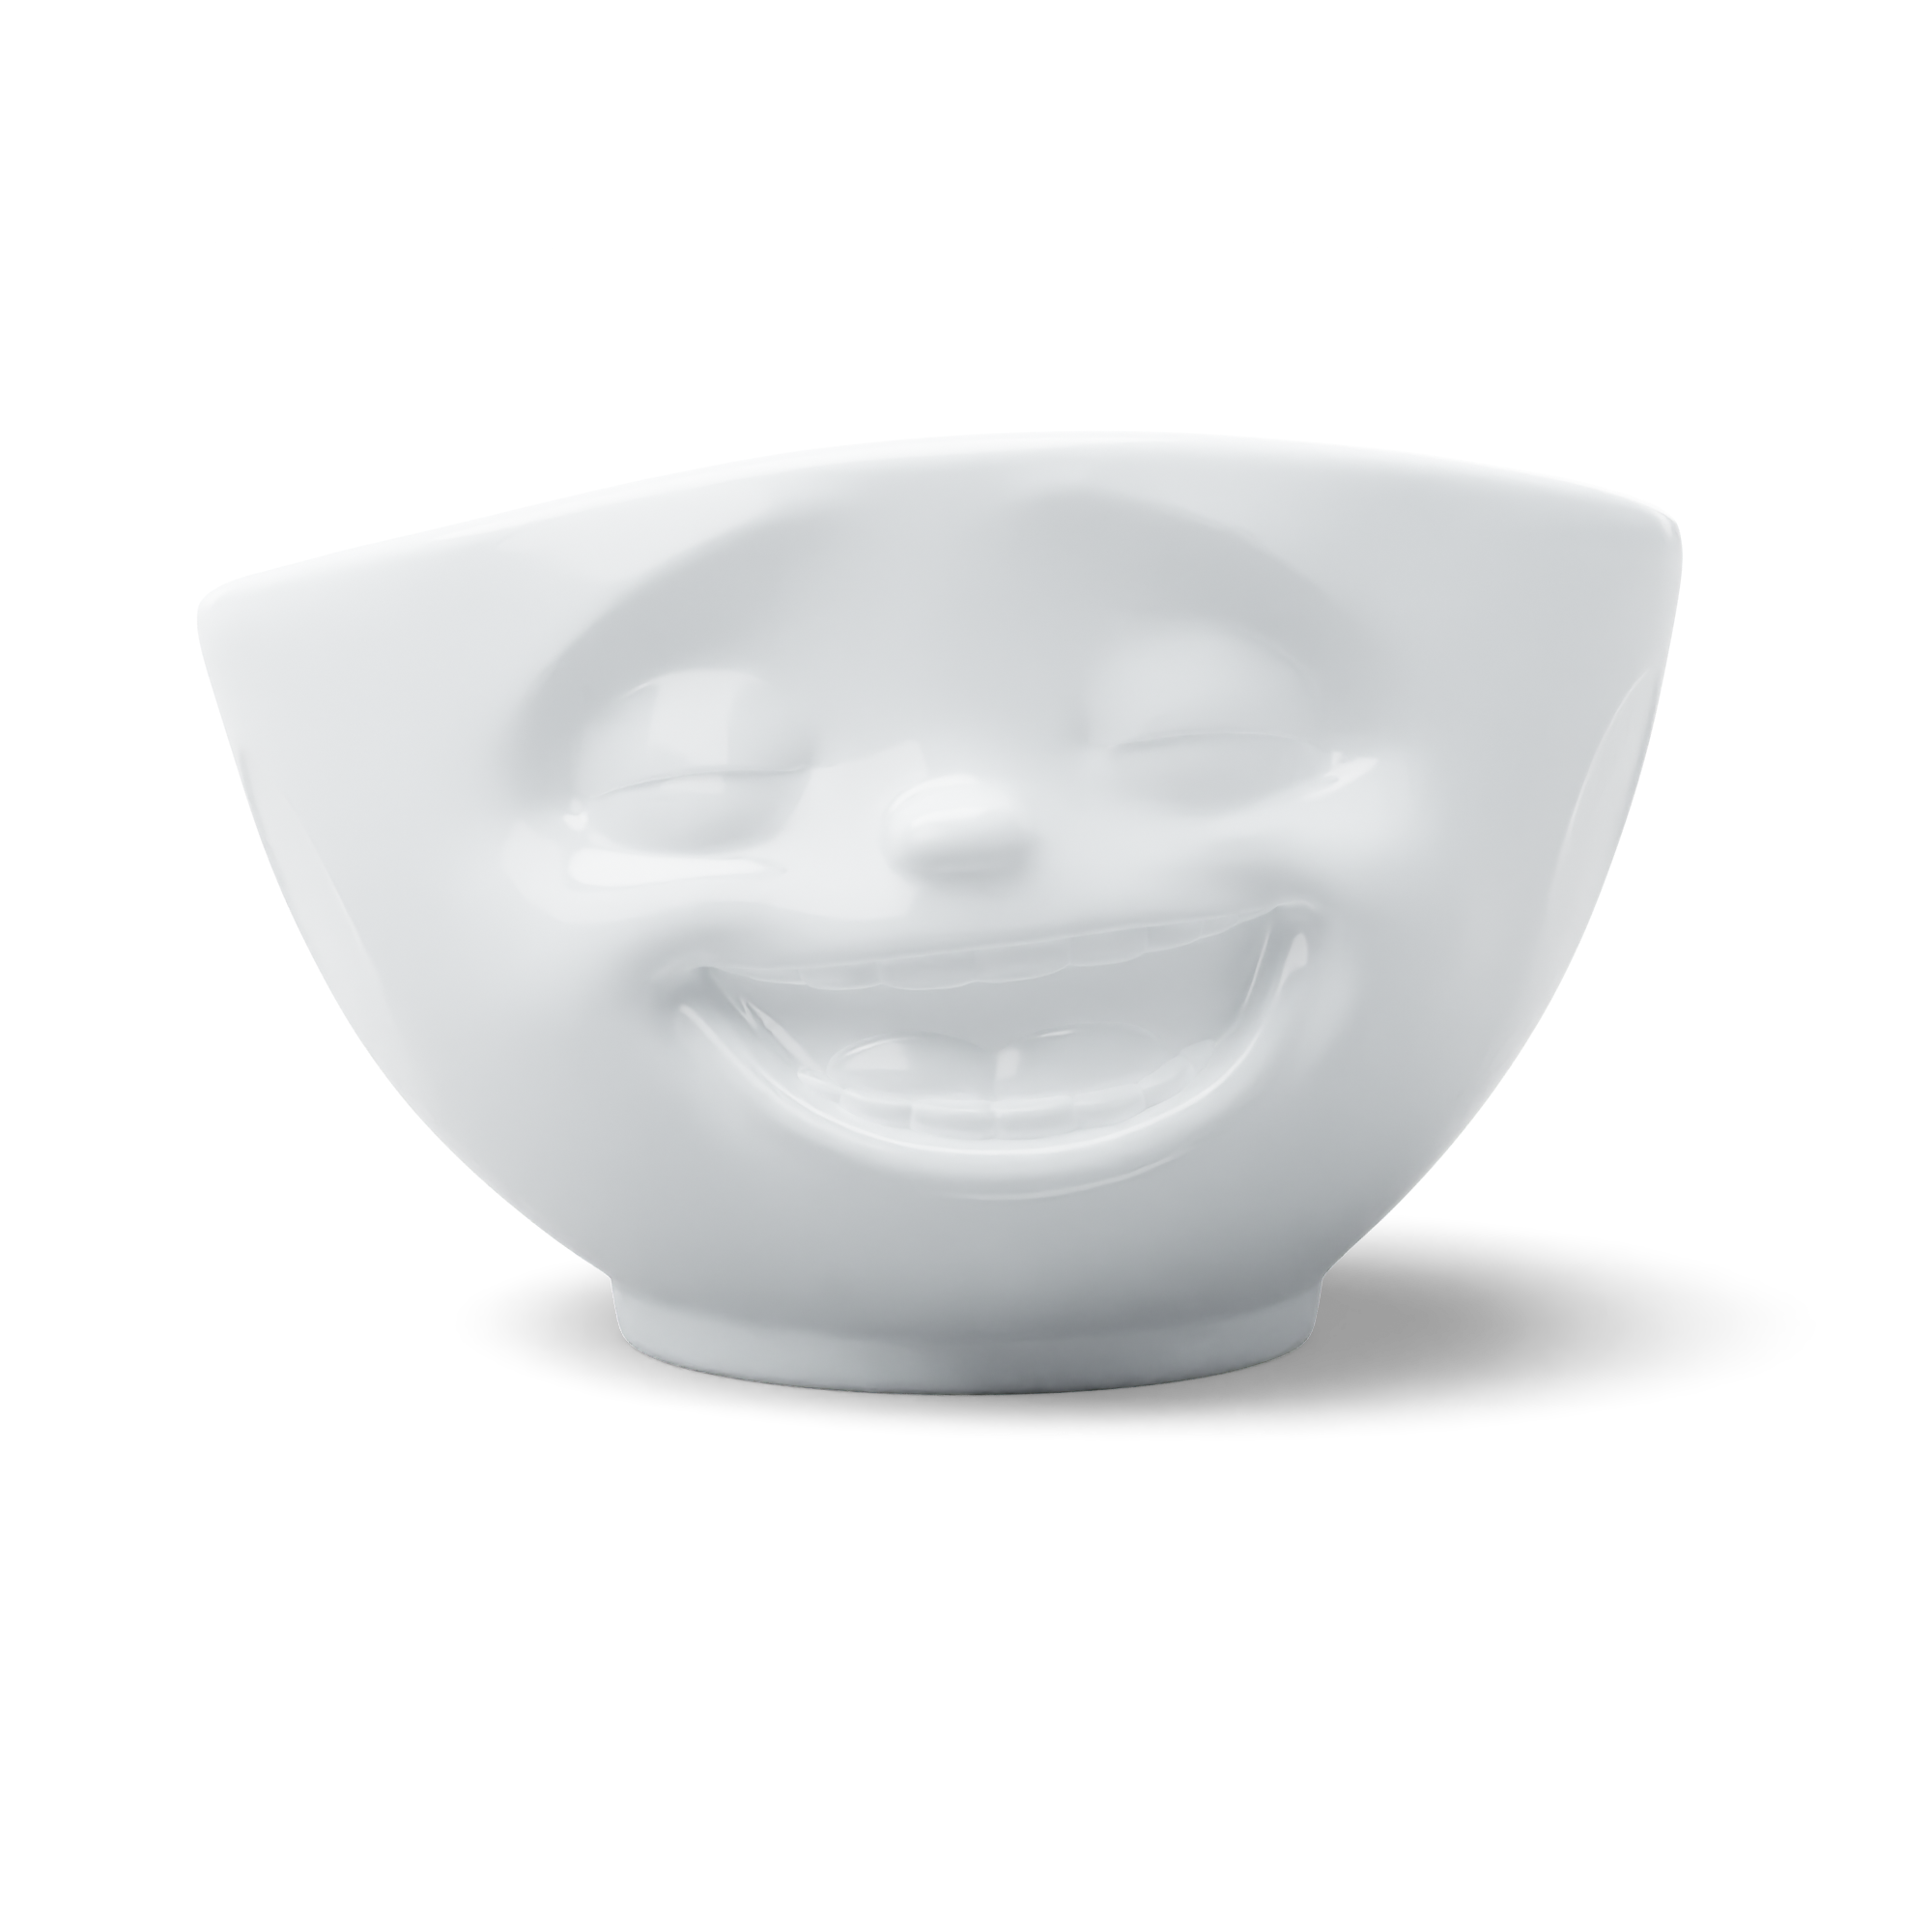 show original title Details about   Fiftyeight Cover Happy 500 ML White Bowl Muesli Bowl Porcelain Face 